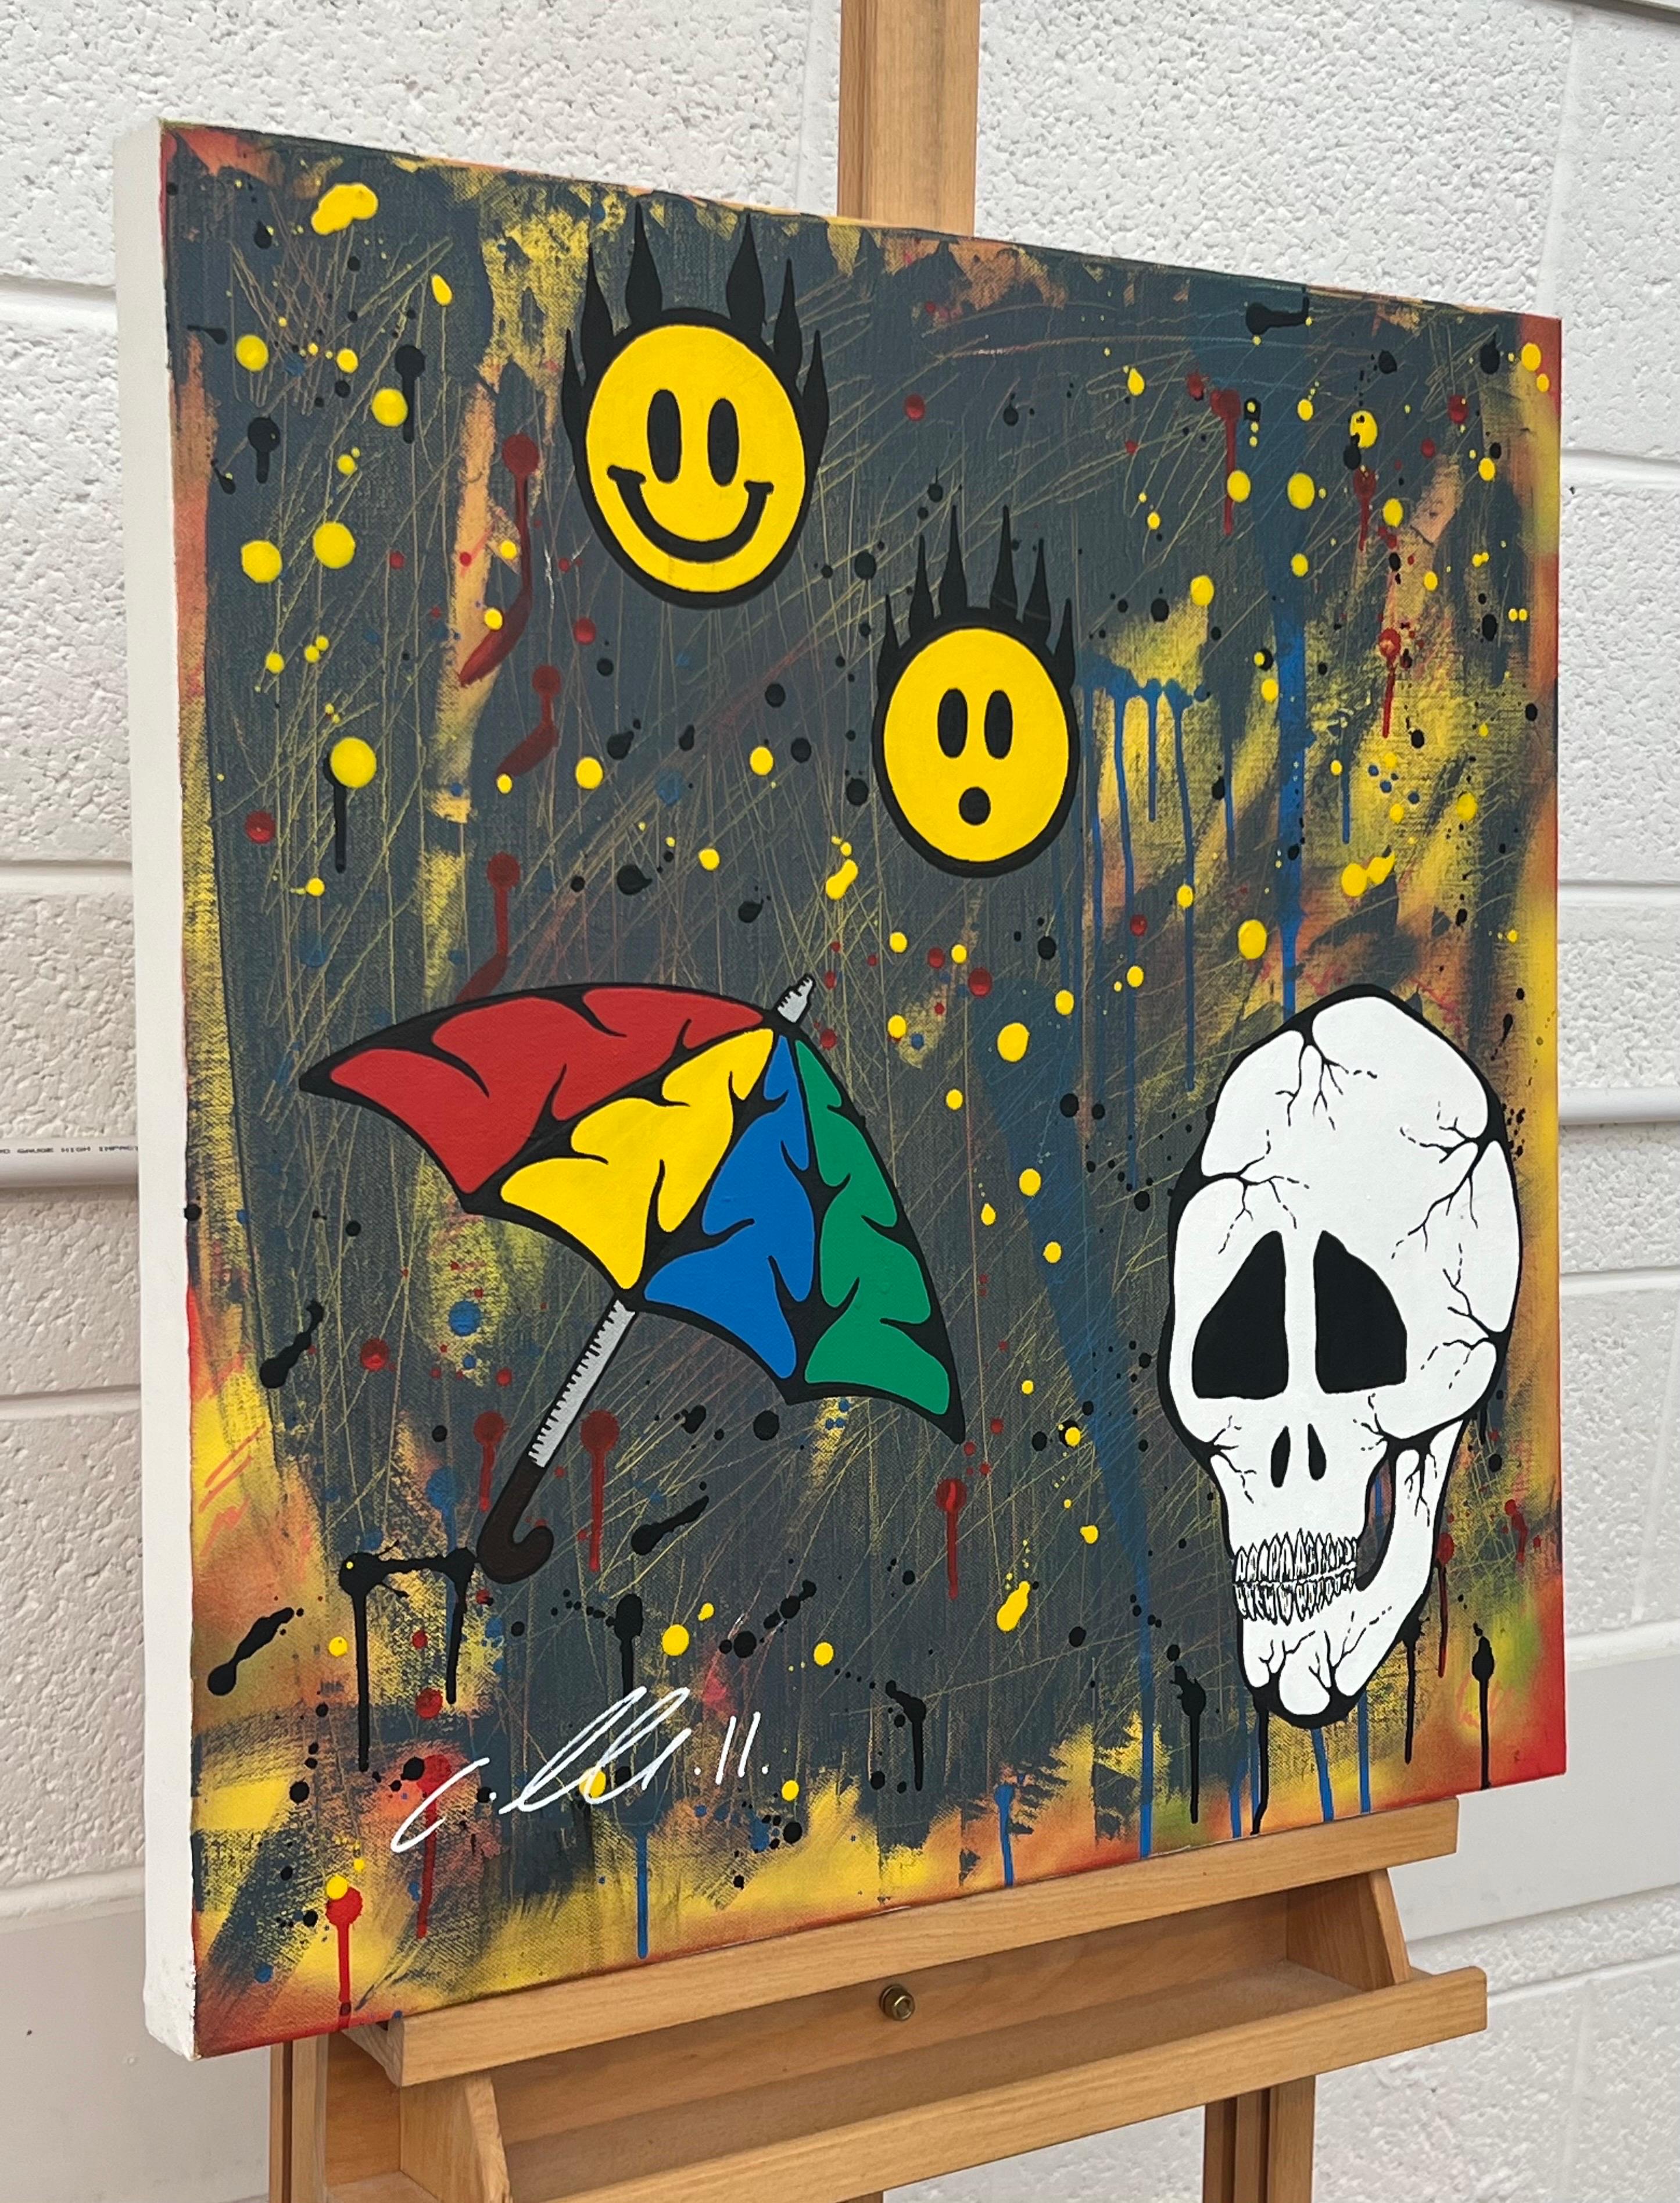 Skull and Emoji Pop Art on Abstract Background by British Graffiti Artist - Painting by Chris Pegg